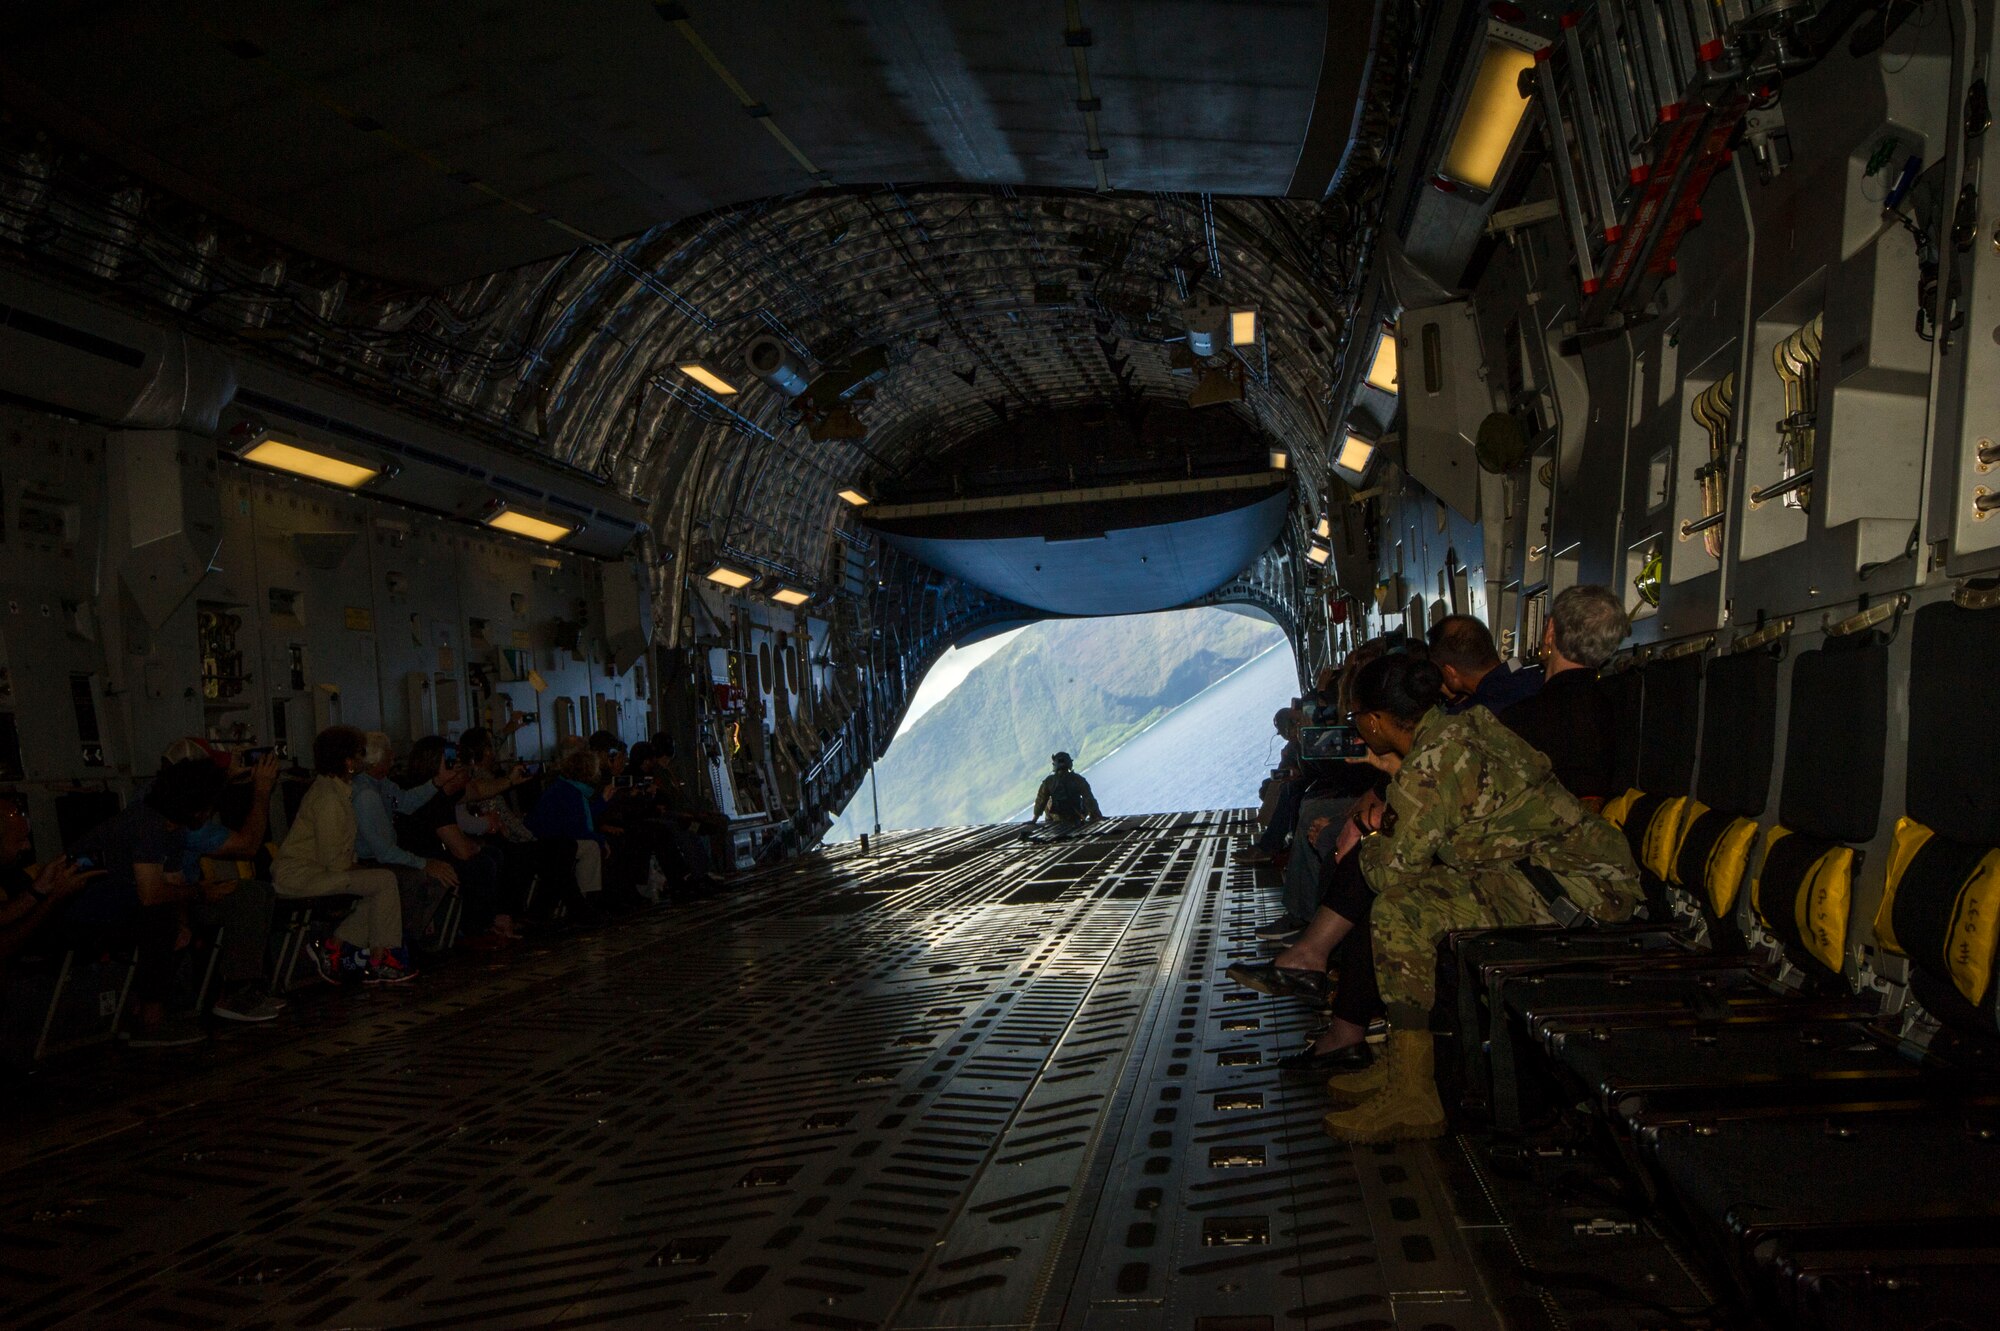 A U.S. Air Force C-17 Globemaster III banks as a loadmaster sits on the back ramp, while members of the Pacific Air Forces’ Air Force Civilian Advisory Council take photos during a simulated cargo drop over waters off the coast of Hawaii, Aug. 20, 2019. Thirty-one AFCAC civic leaders attended a PACAF-hosted C-17 civic leader flight where they witnessed two refueling efforts by a KC-135 Stratofortress and one simulated C-17 cargo drop. (U.S. Air Force photo by Staff Sgt. Jack Sanders)